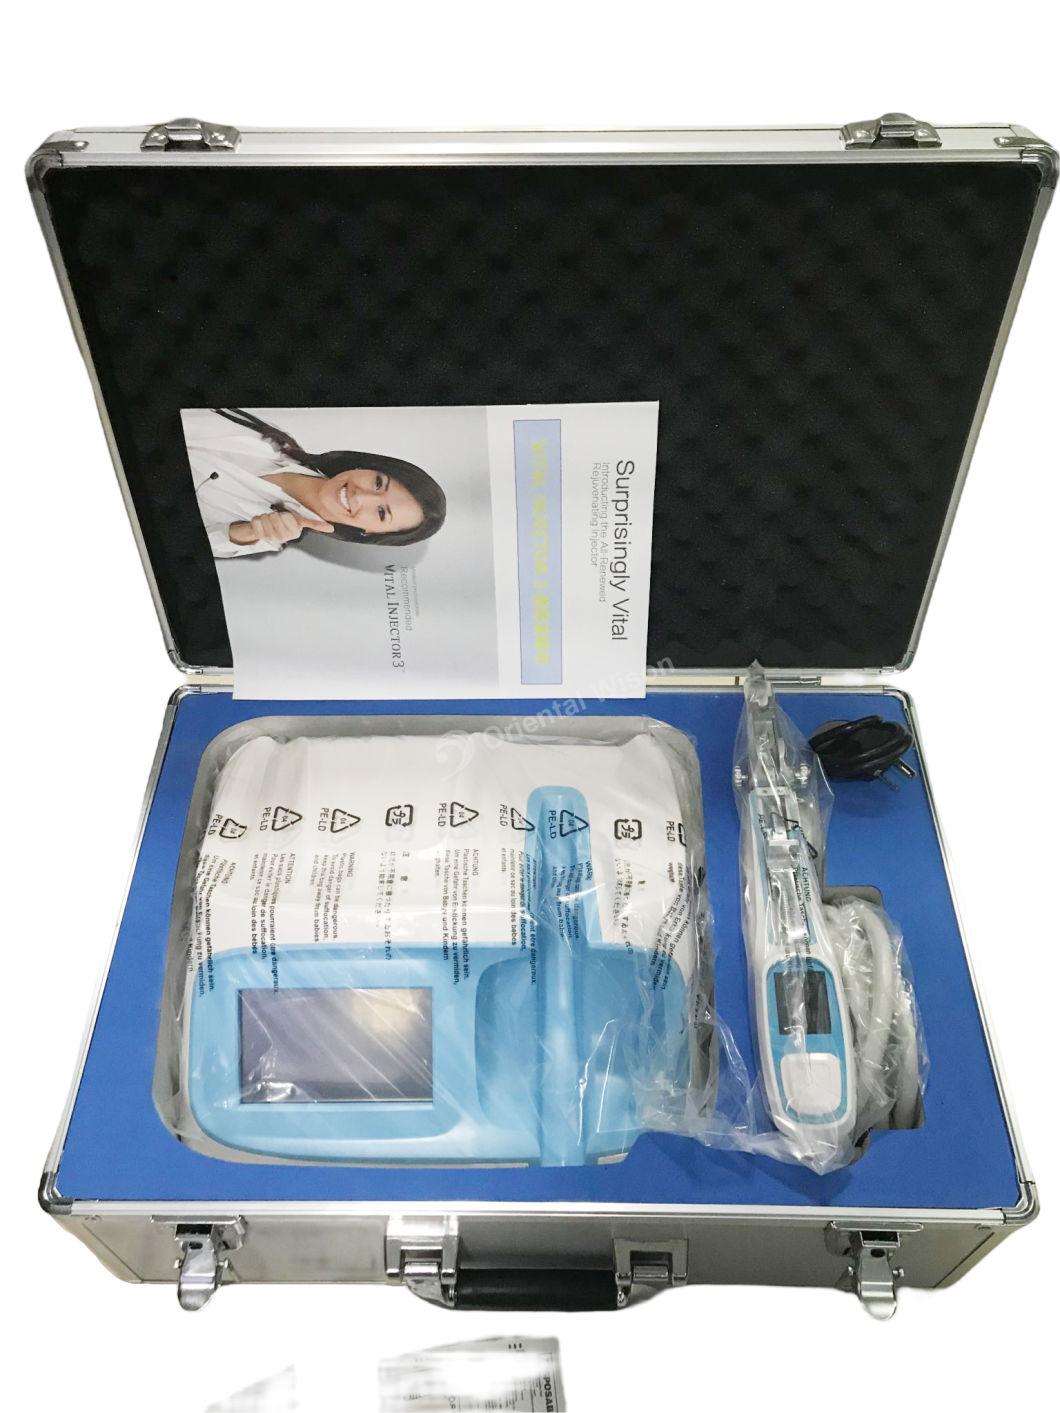 Wrinkle Removal Vital Injector Mesotherapy Gun 5 Pin 9pin Vacuum Injector Lip Filler Mesotherapy Gun Prp Hair Growth Meso Prp Injector